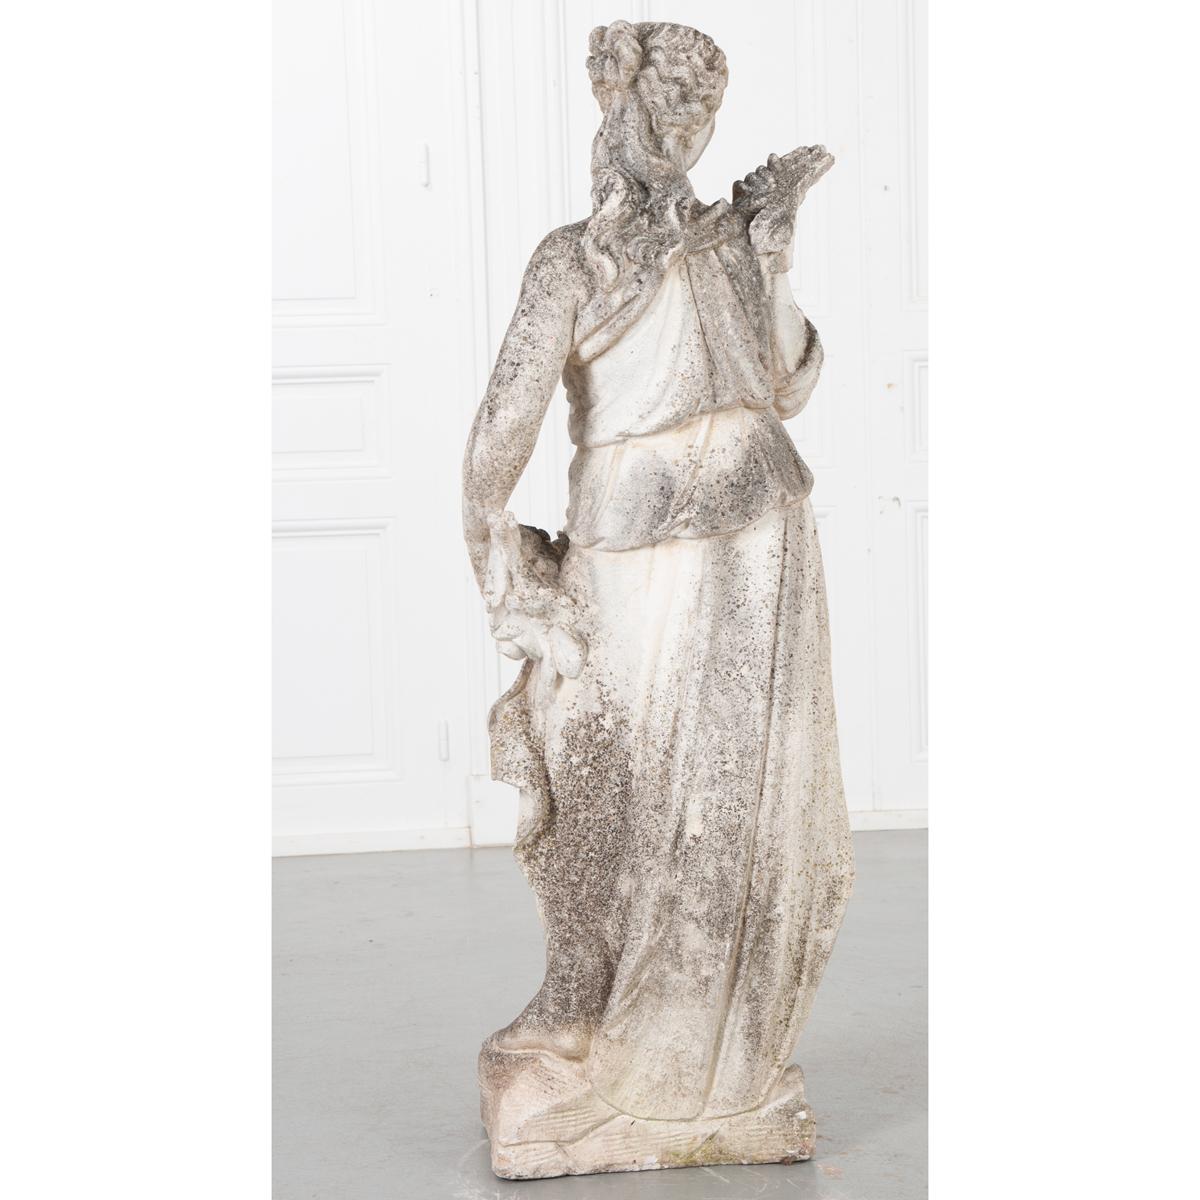 This patinated cast stone statue would work beautifully indoors or outdoors. It is French and from the 19th century. It depicts a robed female with one hand on her shoulder draping a garland of flowers across her body to her opposite hand. Peeking